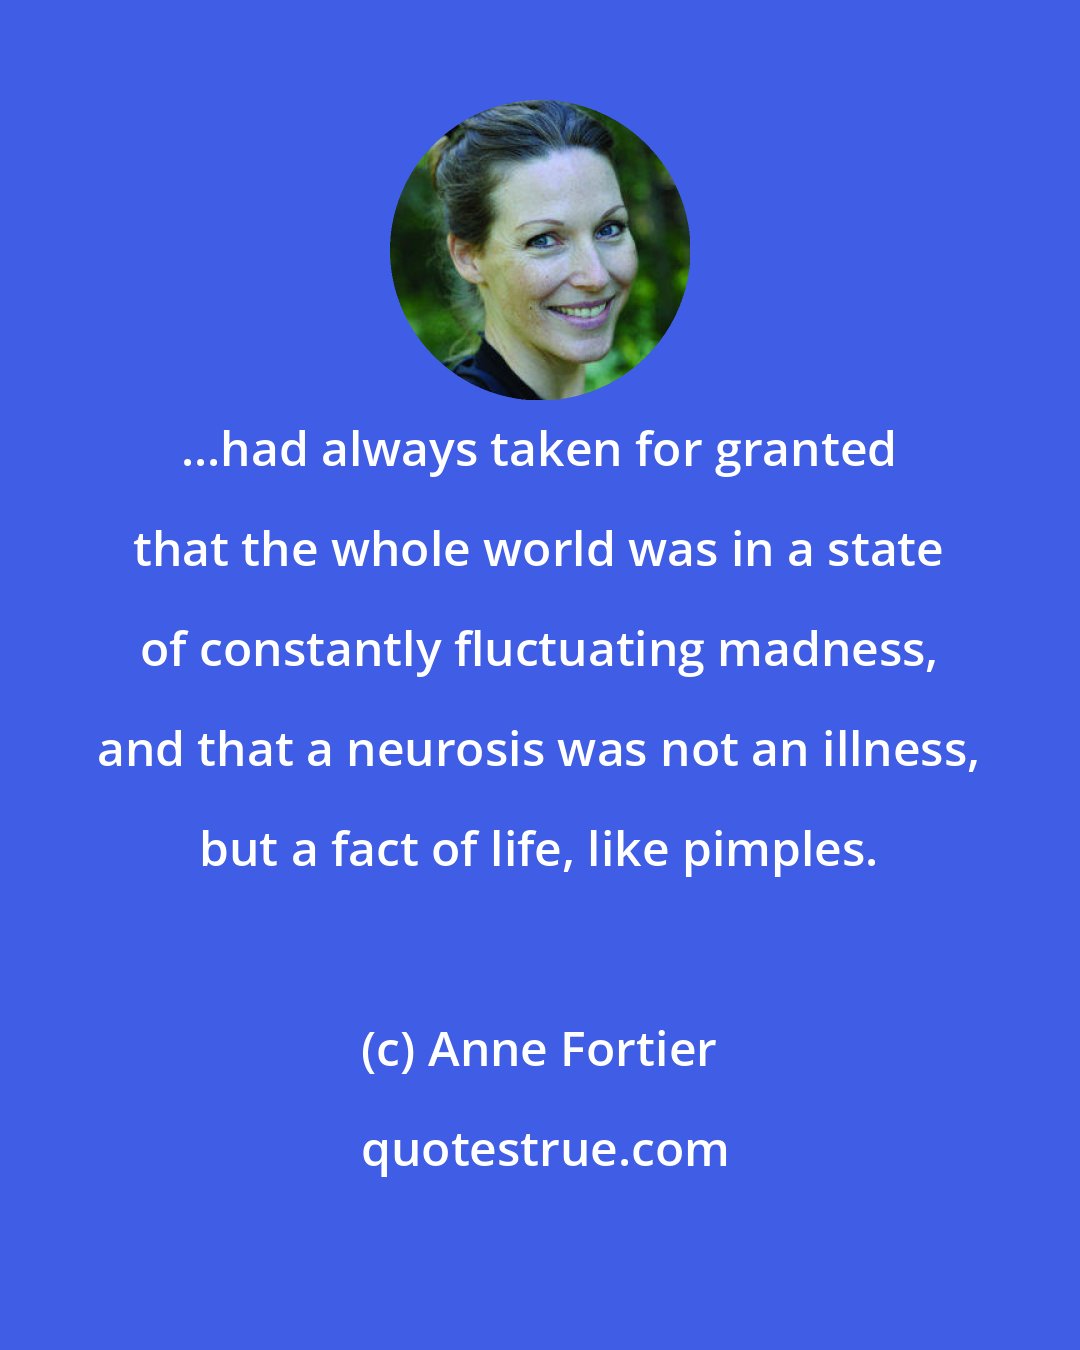 Anne Fortier: ...had always taken for granted that the whole world was in a state of constantly fluctuating madness, and that a neurosis was not an illness, but a fact of life, like pimples.